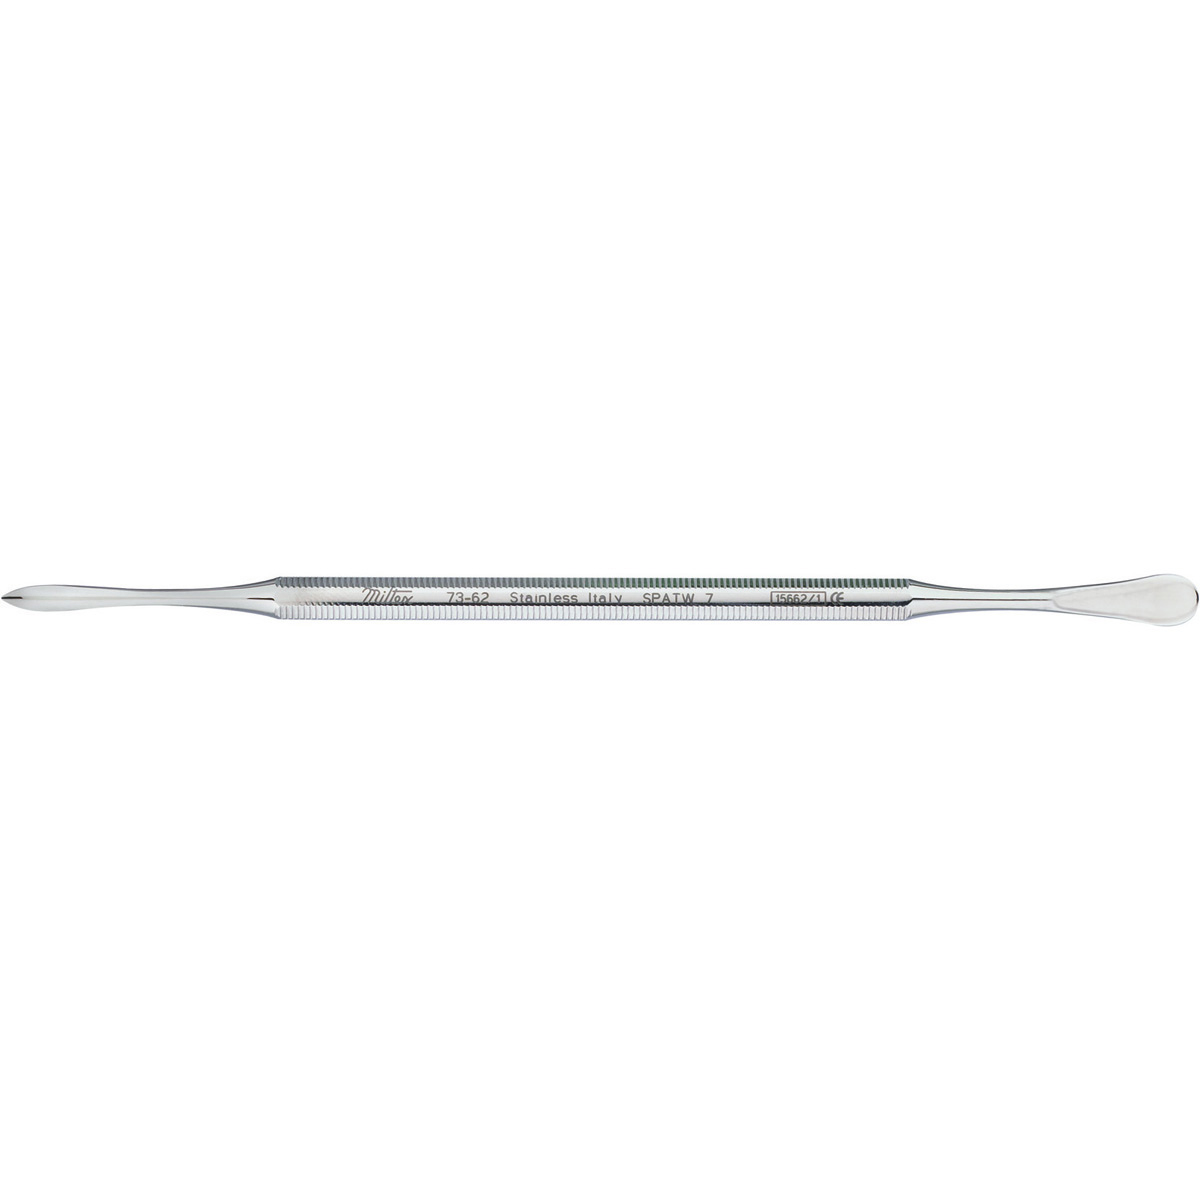 Dental wax spatula - TI-03-1011 - Transact International - single-ended /  disposable / stainless steel